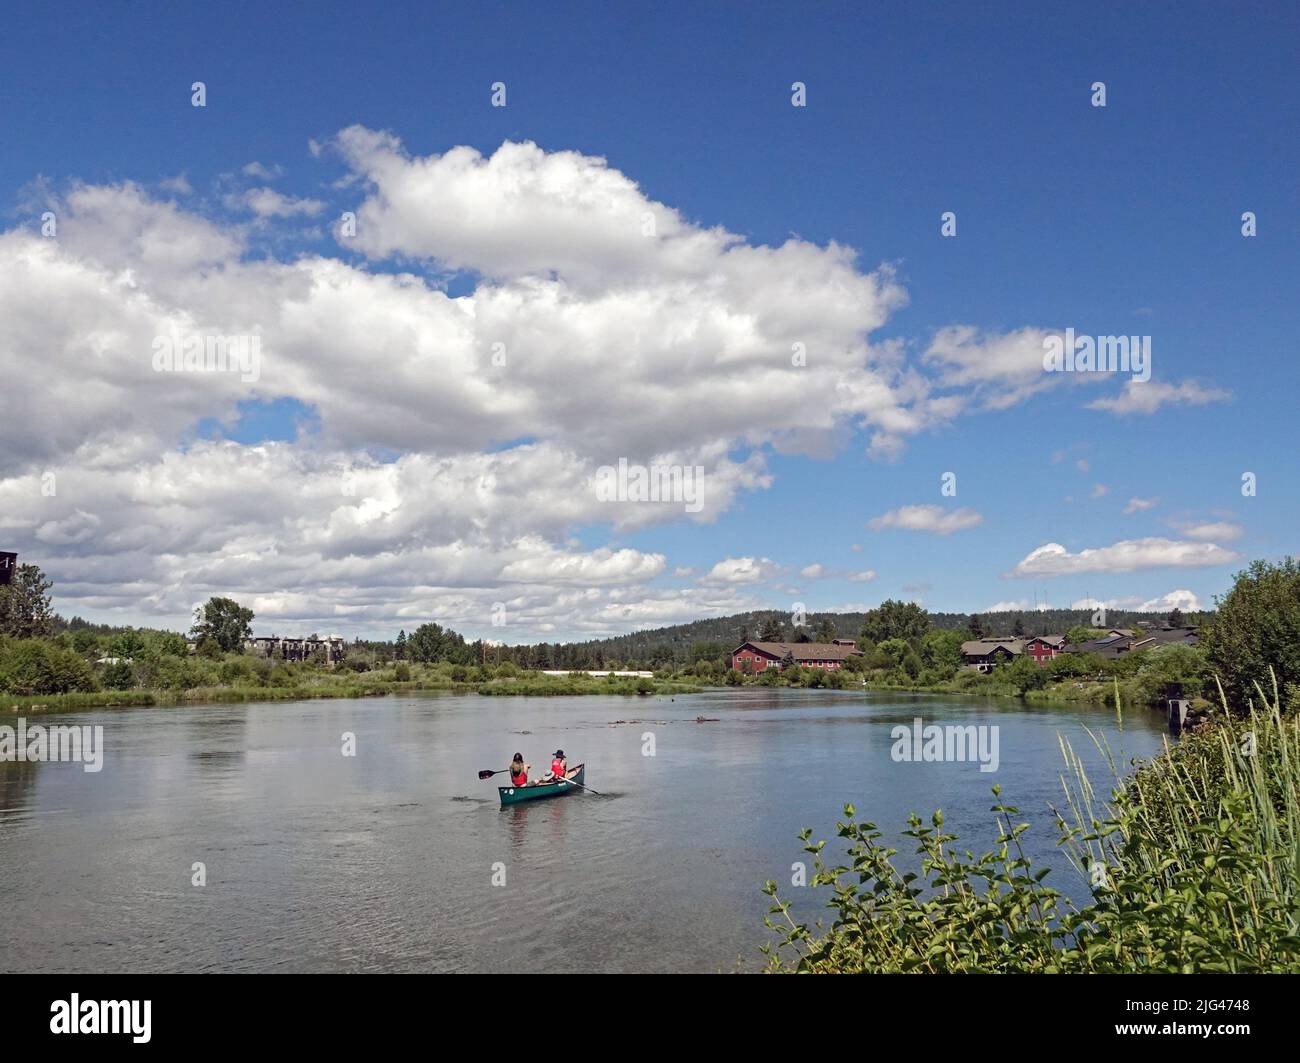 A canoe floats in the Deschutes River in the Old Mill Shopping District of Bend, Oregon. Stock Photo